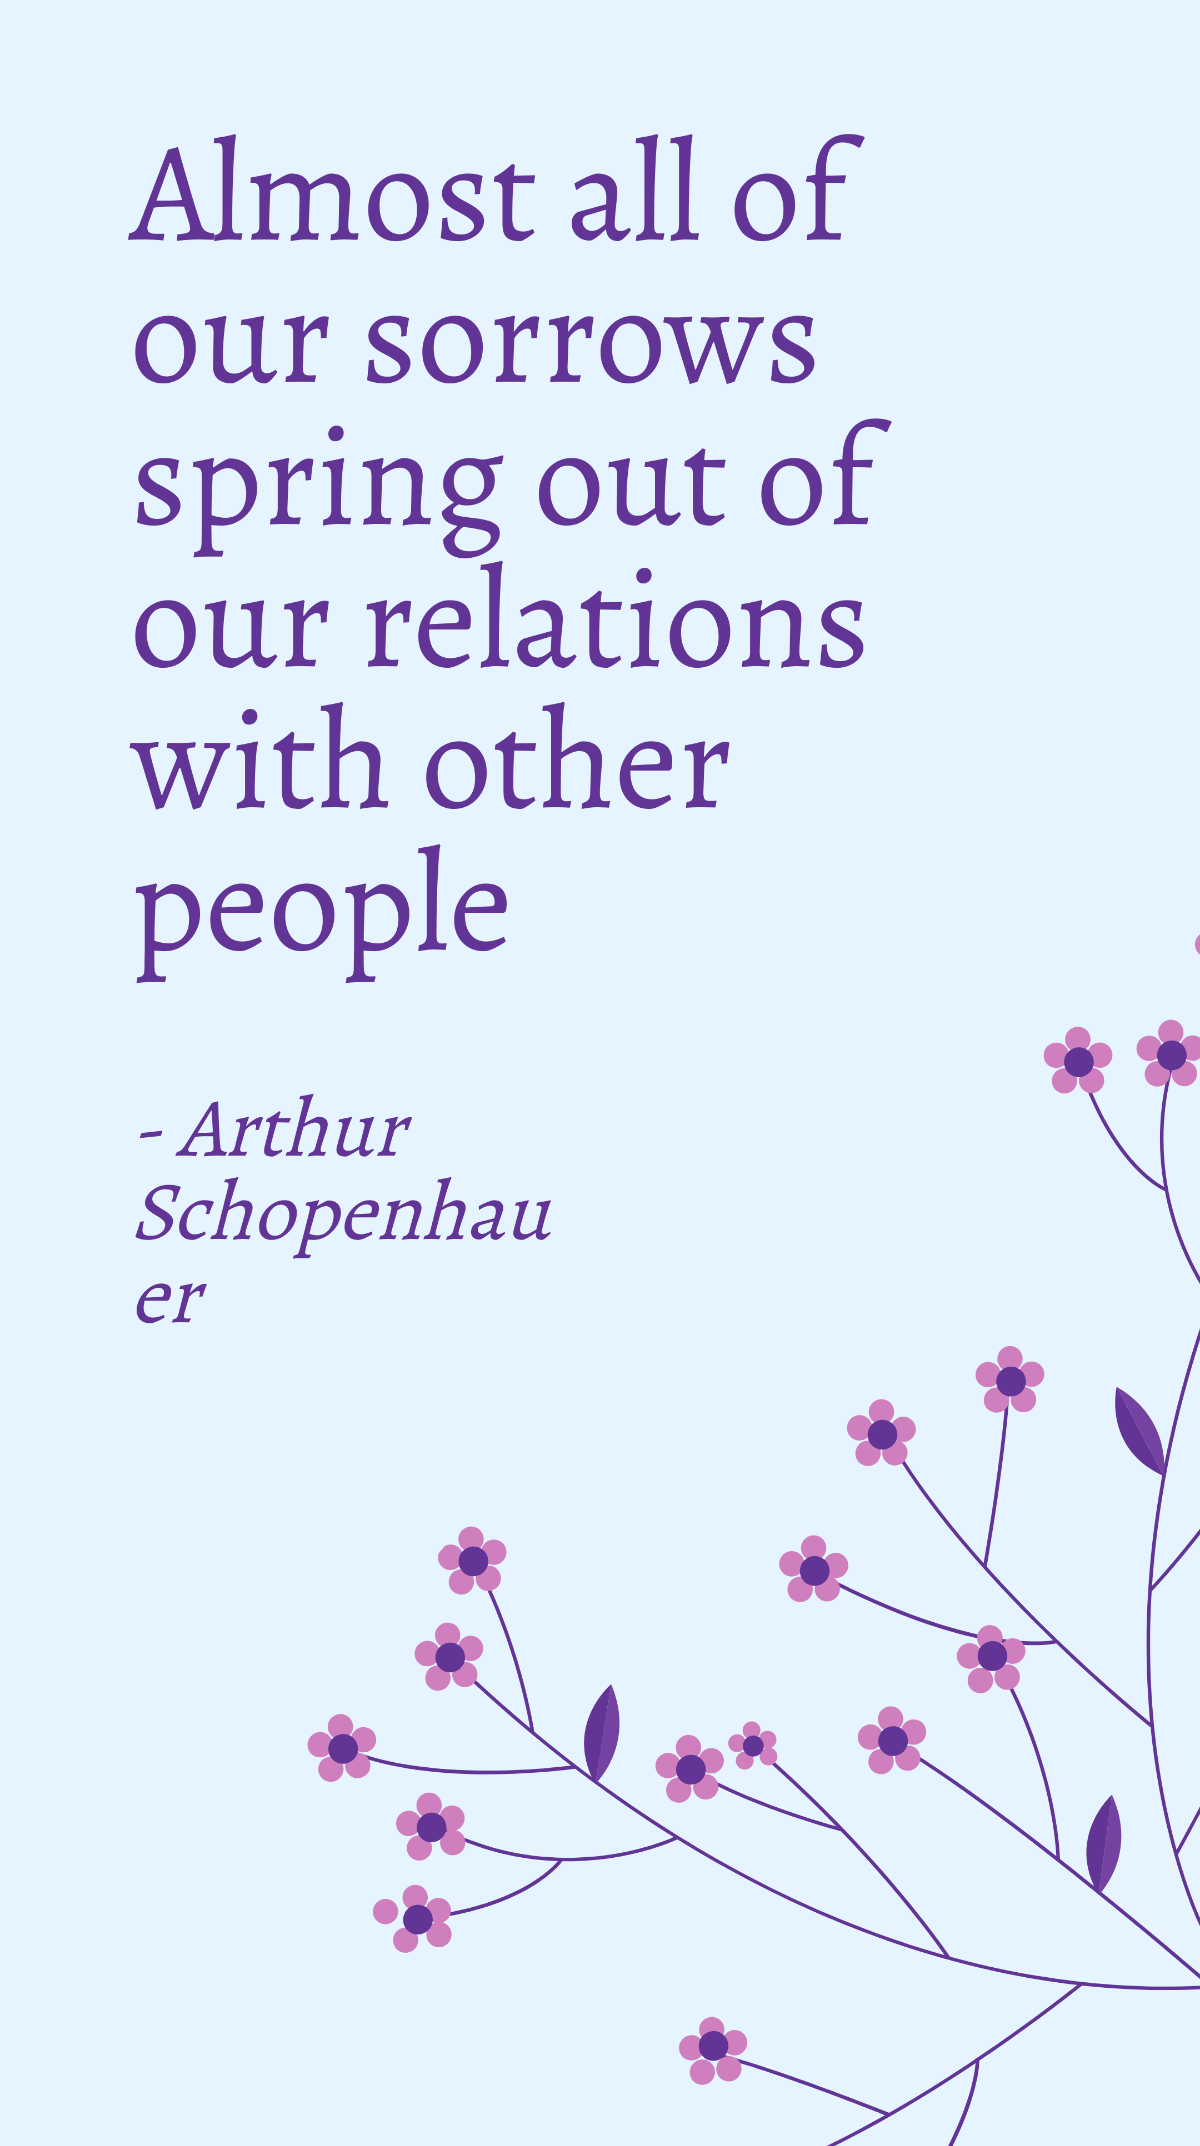 Arthur Schopenhauer - Almost all of our sorrows spring out of our relations with other people Template